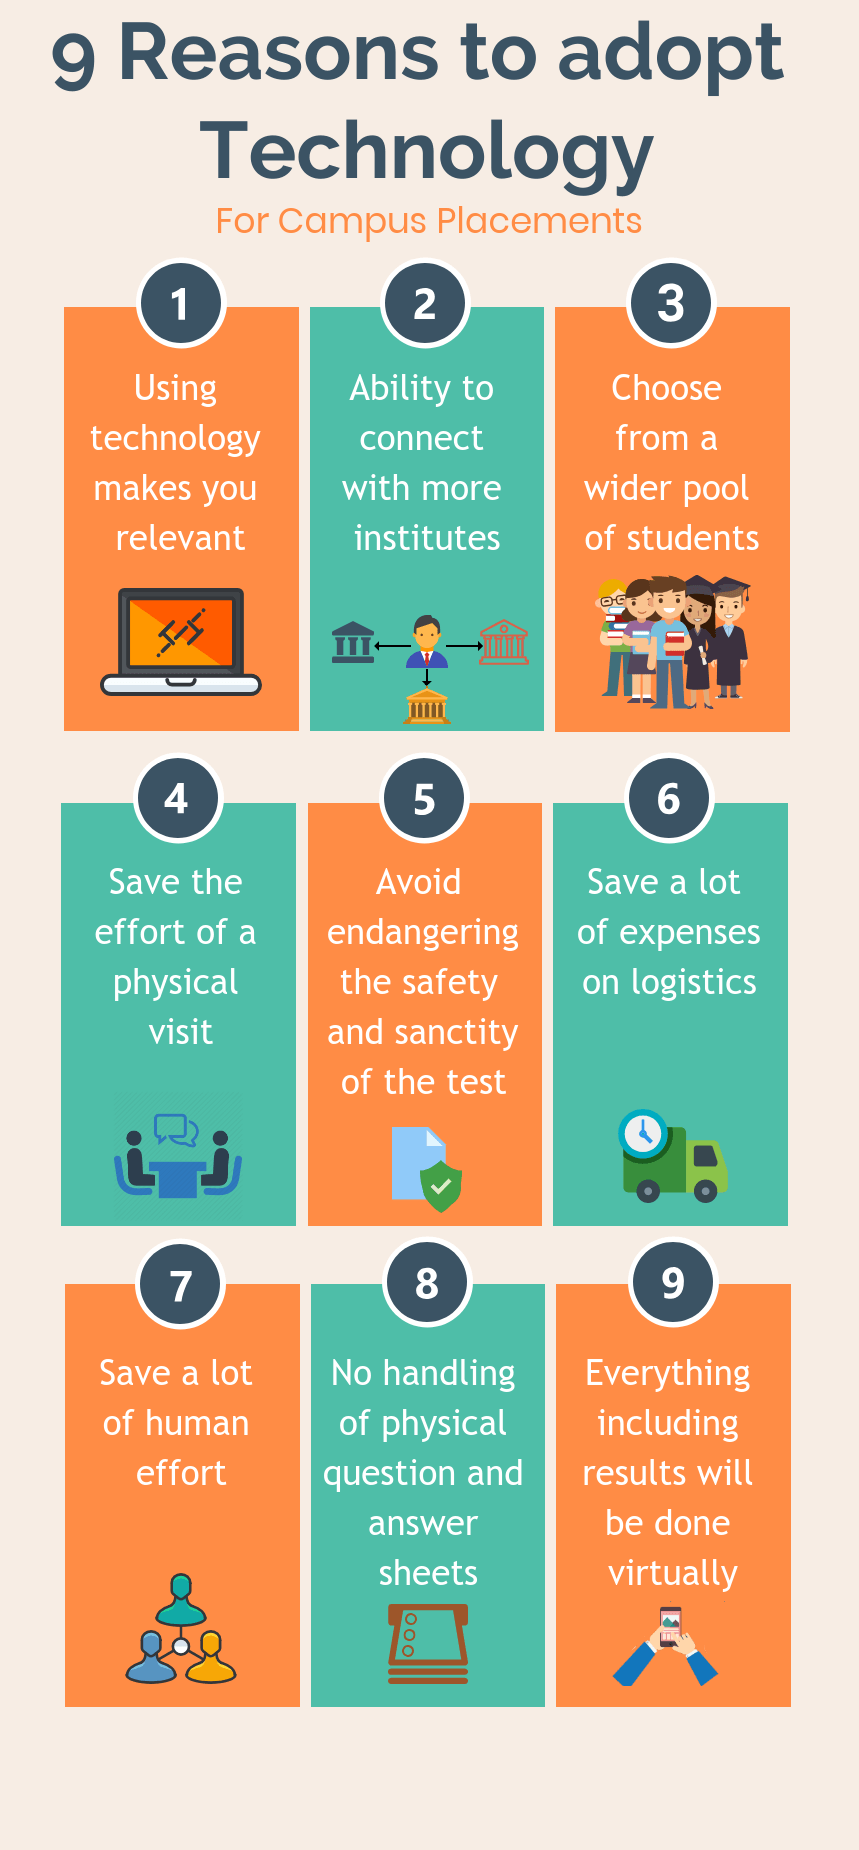 9 Reasons to adopt technology for campus placements